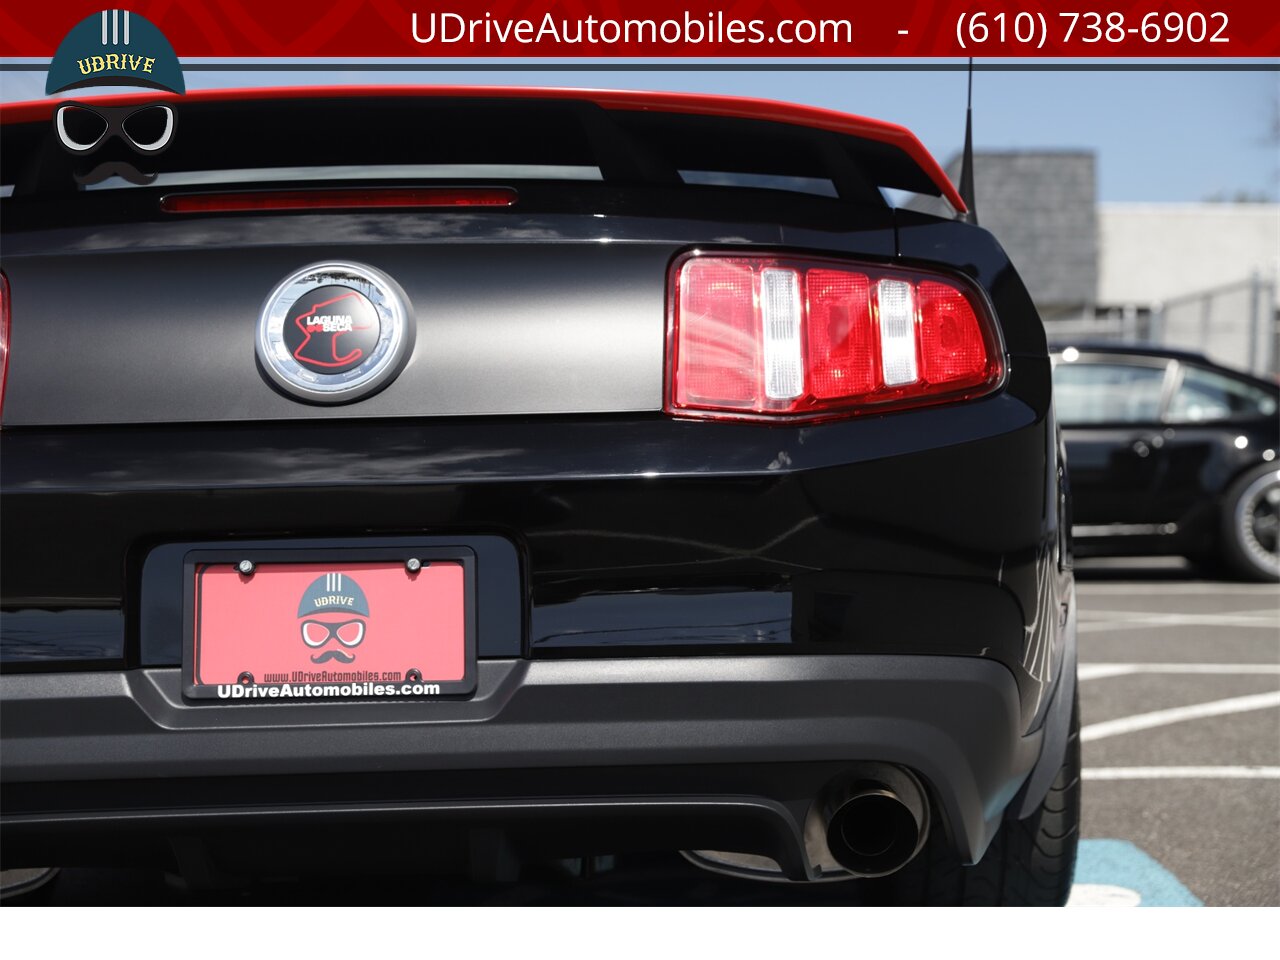 2012 Ford Mustang 866 Miles Boss 302 Laguna Seca #338 of 750  Red TracKey Activated - Photo 19 - West Chester, PA 19382